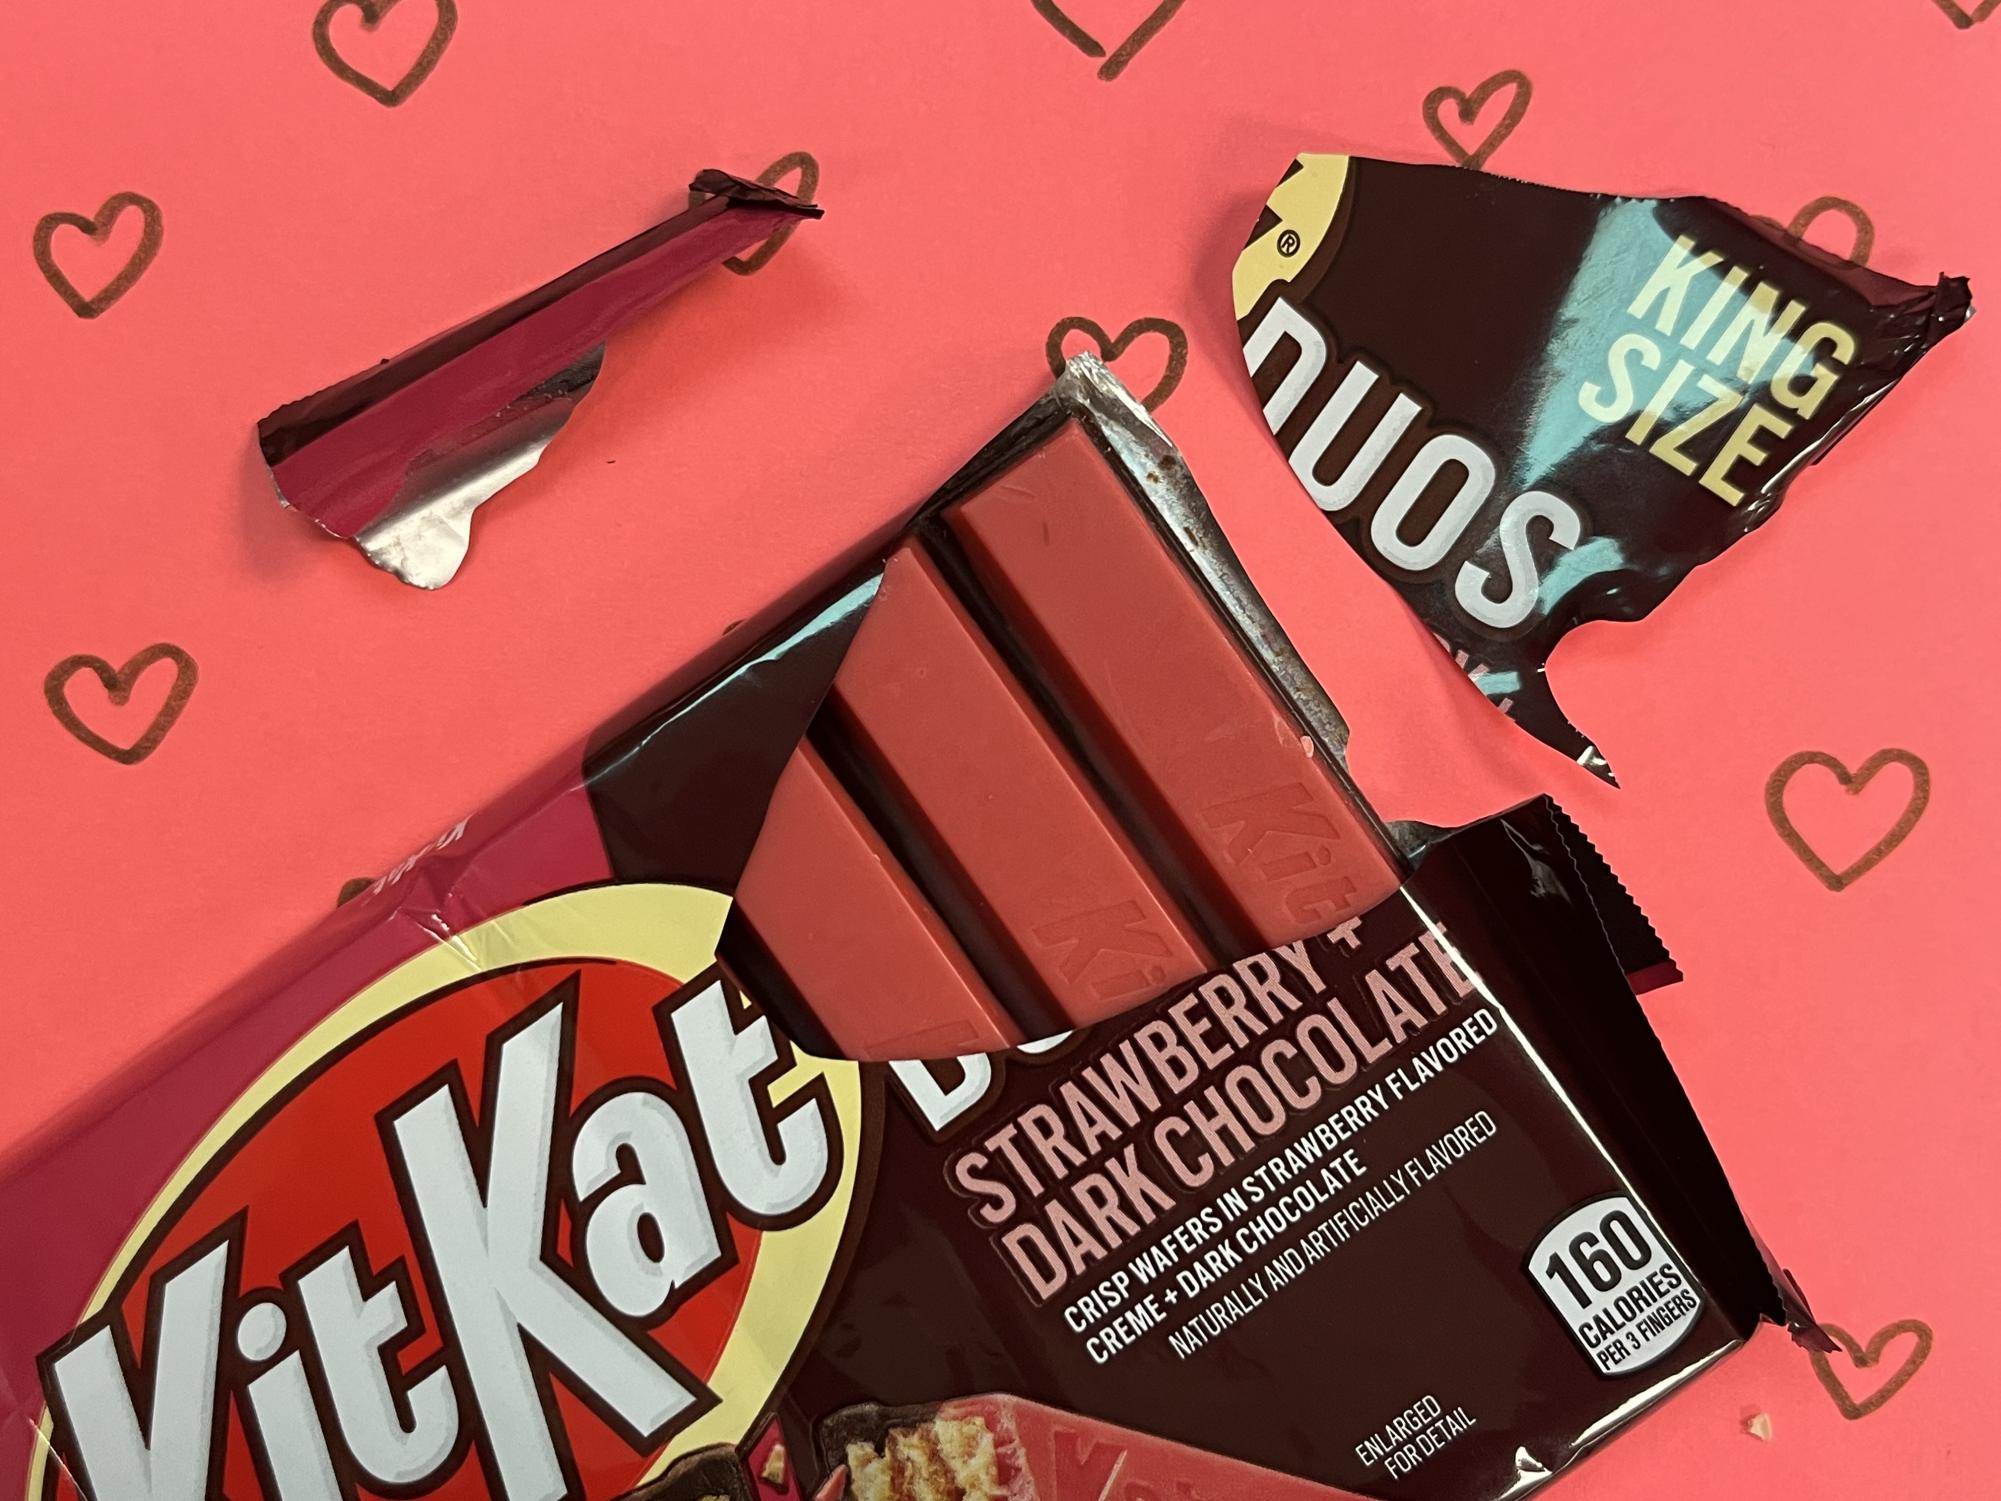 The Kit Kat Duo: Strawberry + Dark Chocolate features a hint of artificial strawberry flavoring and the soft
taste of dark chocolate.